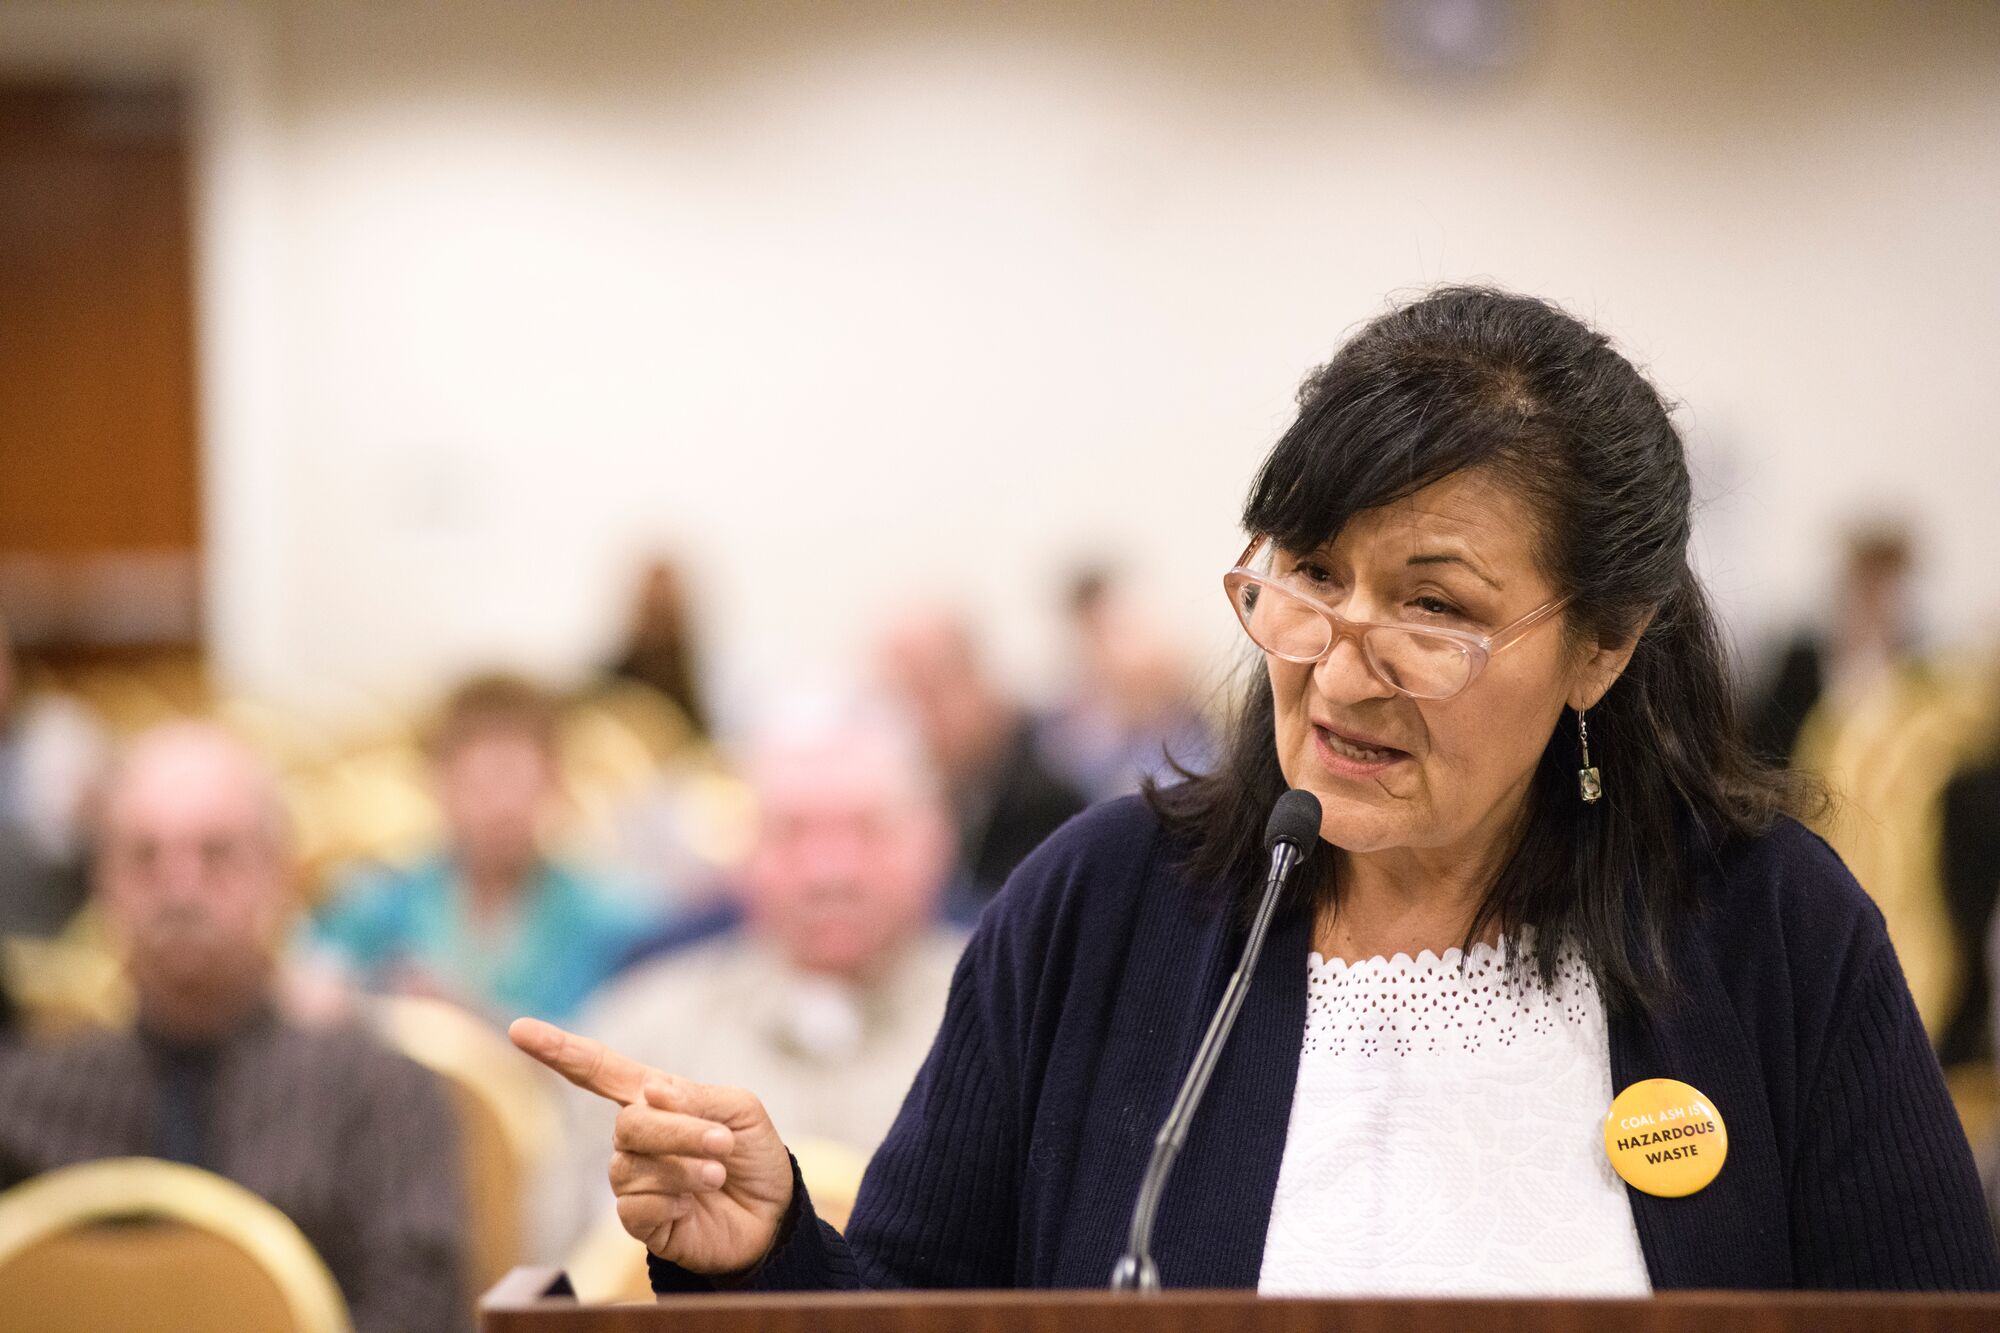 Vickie Simmons of the Moapa Band of Paiutes describes the deadly effects of coal ash on her family and neighbors, during an EPA hearing on regulating coal ash in Arlington, Virginia in 2018.